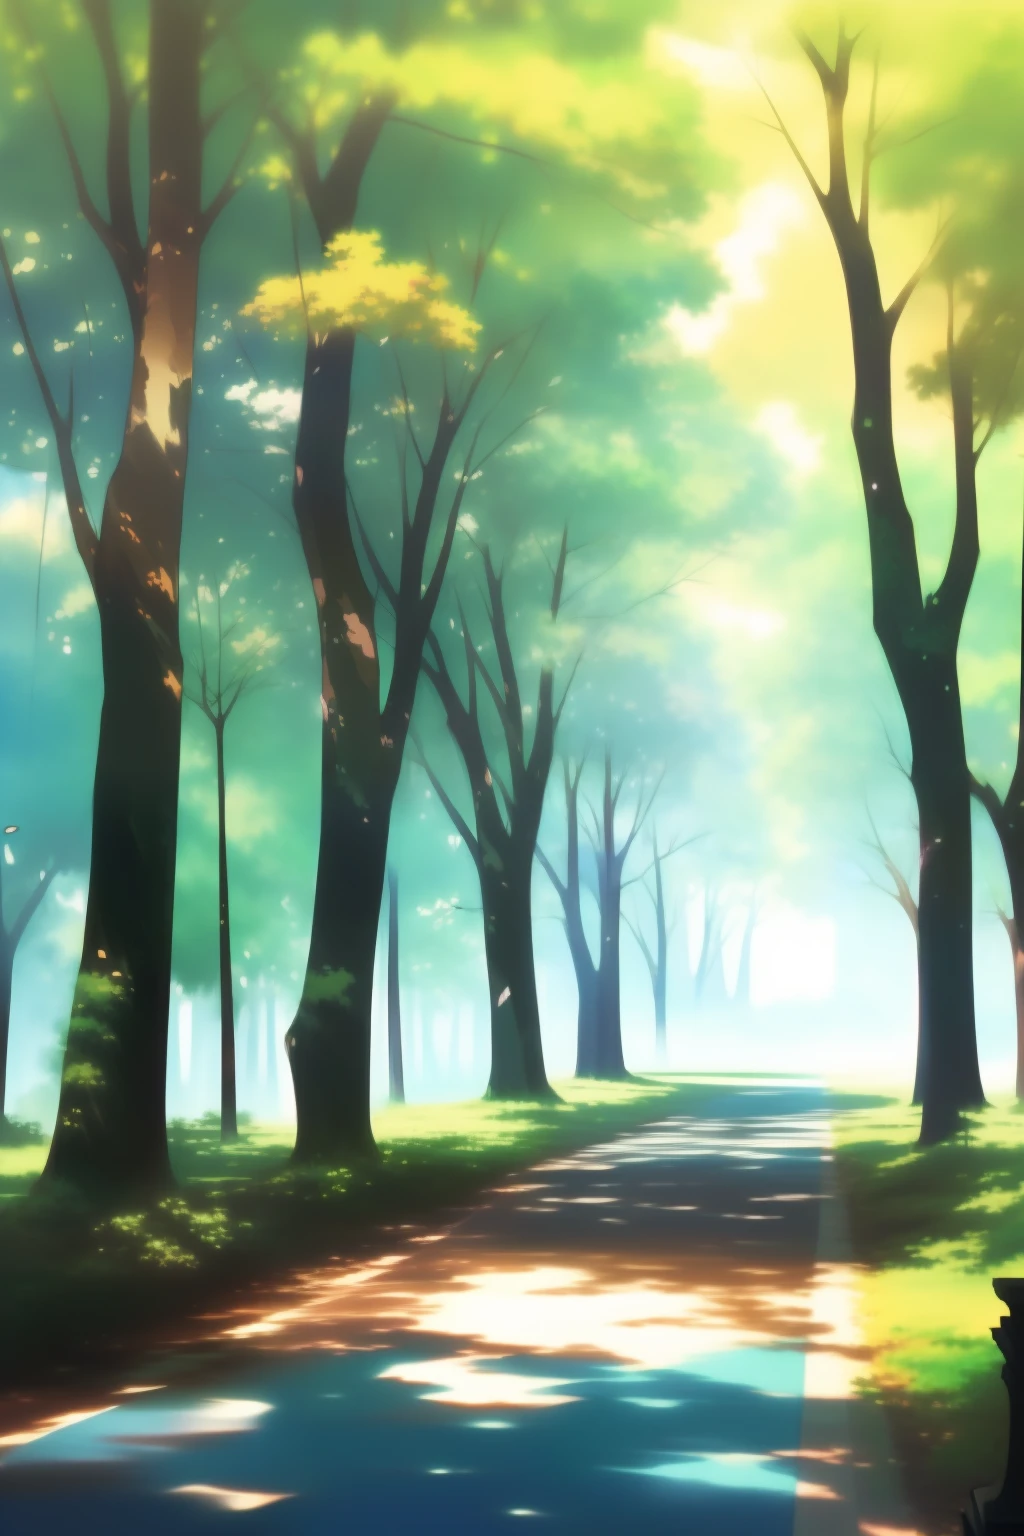 A painting of a park，There are trees and benches in the middle, anime nature wallpap, Anime background art, Anime Nature, anime landscape wallpapers, beautiful anime scenery, anime backgrounds, anime countryside landscape, Anime landscape, Anime art wallpaper 4 K, Anime art wallpaper 4k, Anime landscapes, anime beautiful peace scene, landscape artwork, scenery wallpaper, Anime art wallpaper 8 K